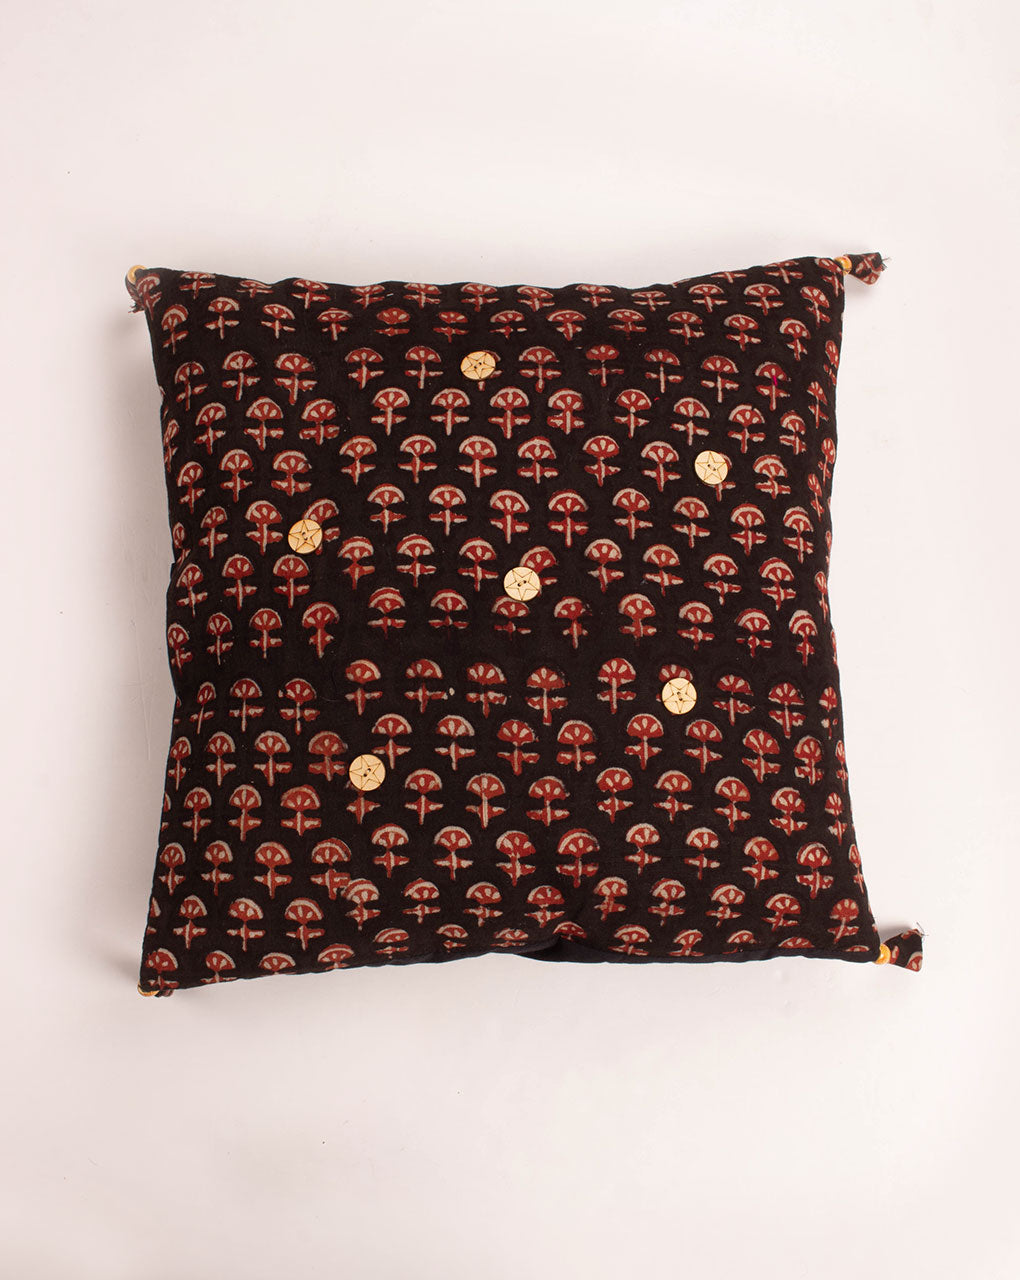 Hand Crafted Ajrak Cotton Cushion Cover ( 16X16 Inches ) - Fabriclore.com